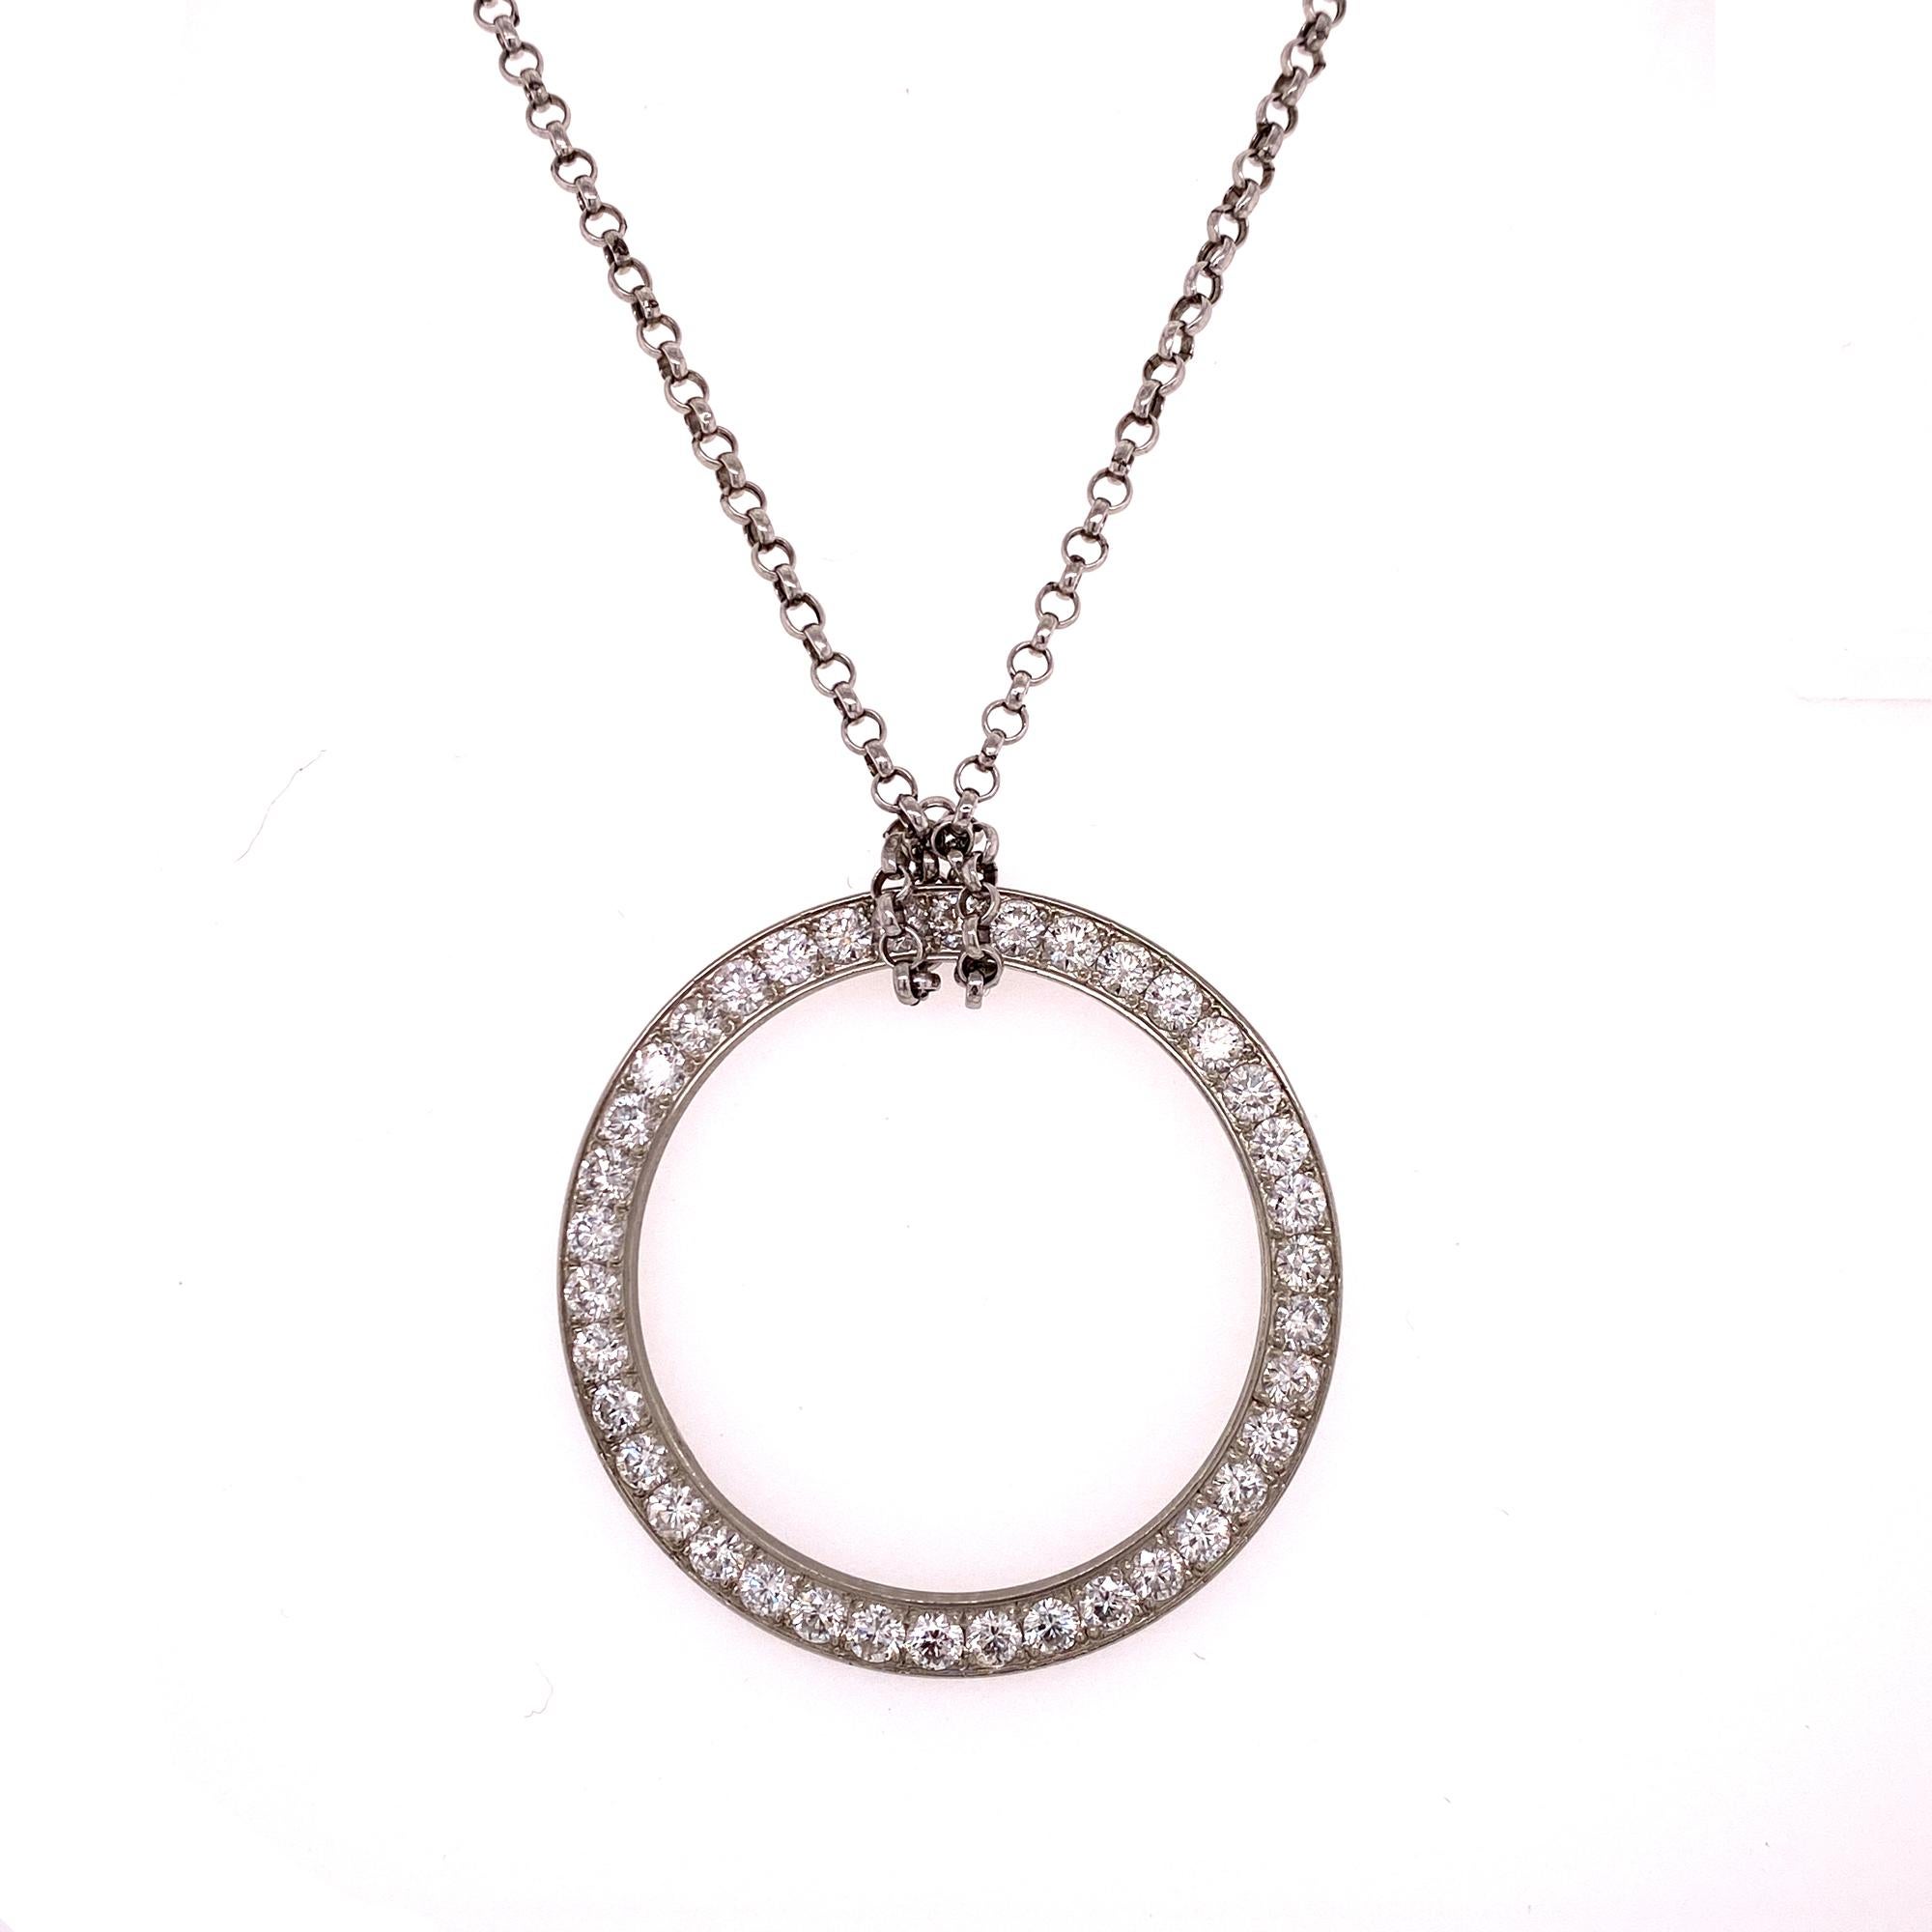 Fabulous large diamond open circle of life pendant crafted in platinum. The 1.5 inch circle features 38 round brilliant cut diamonds weighing 3.80 carat total weight and graded G-H color and VS clarity. The platinum chain measures 18 inches in